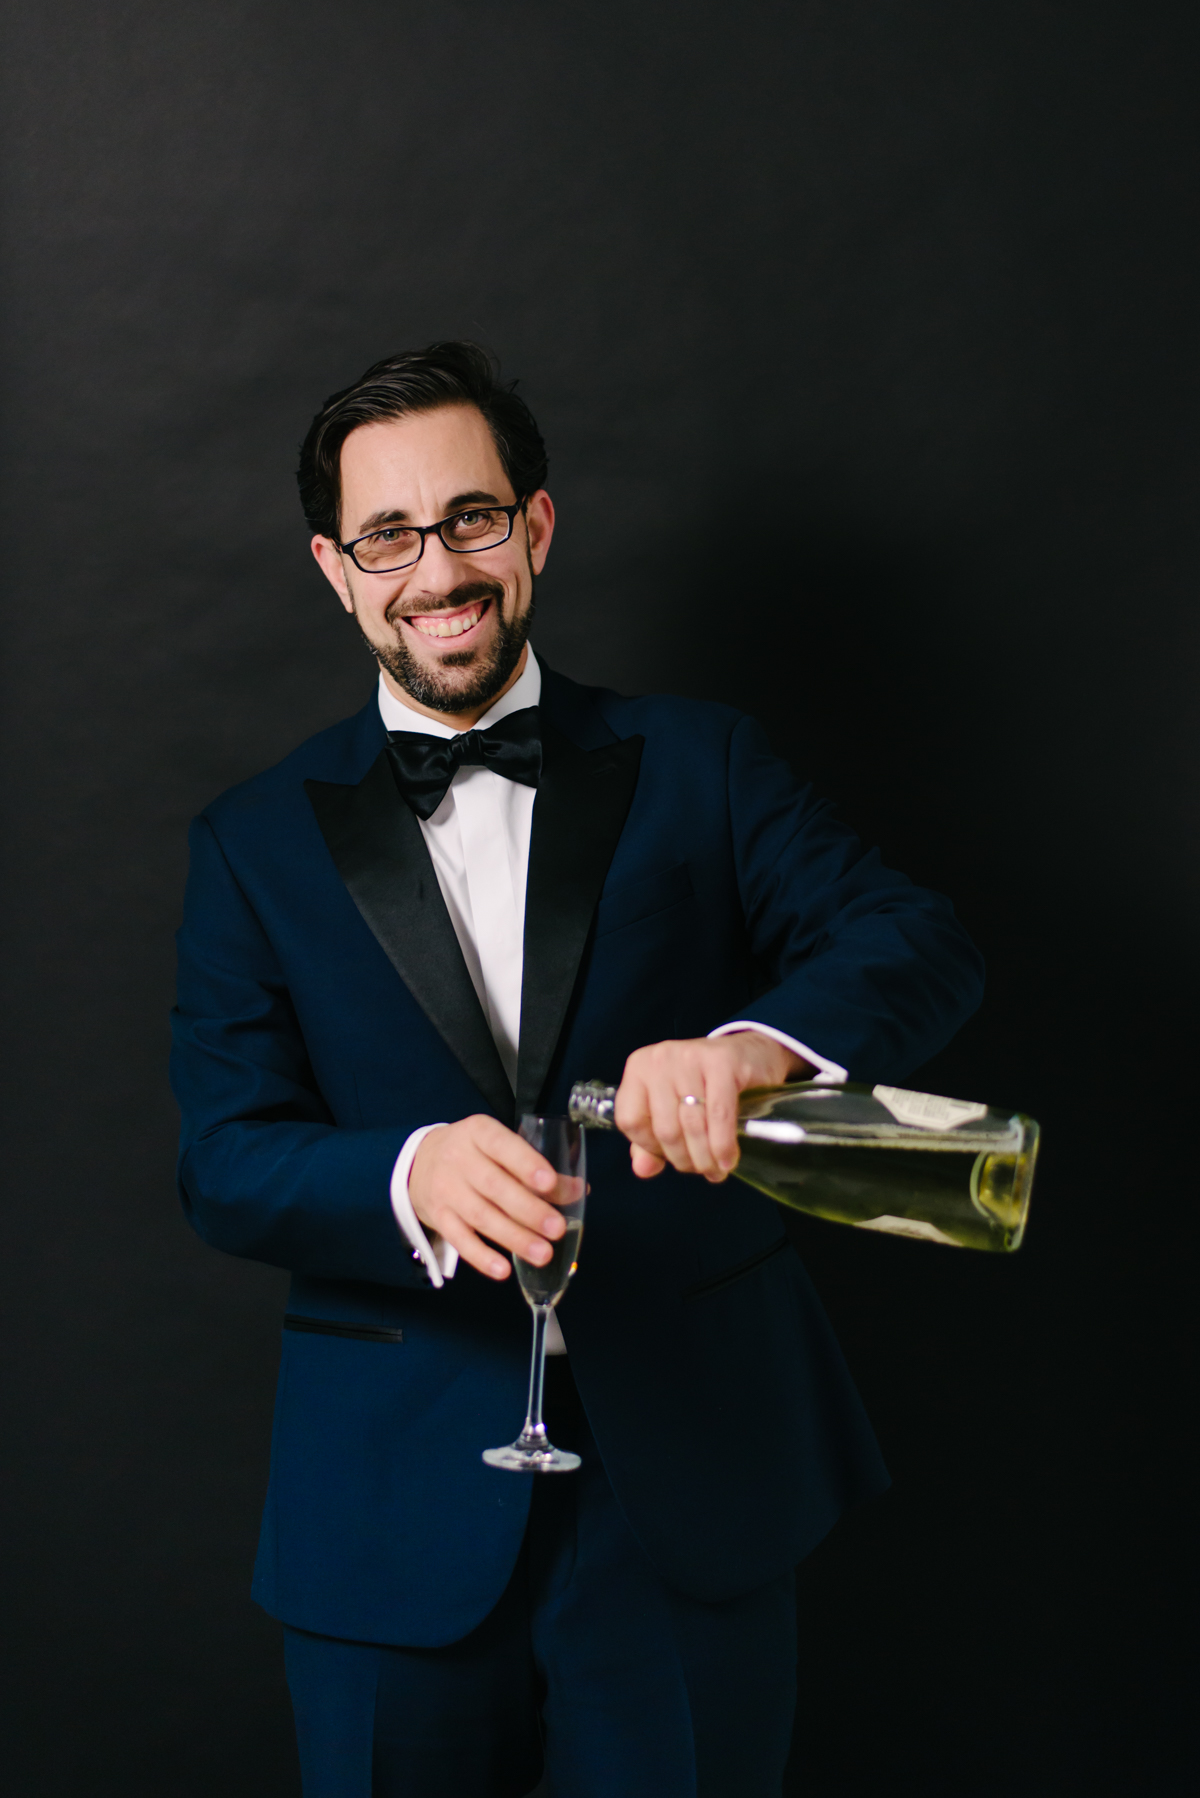 A ridiculously good looking man wears a dark blue tuxedo while pouring wine into a glass